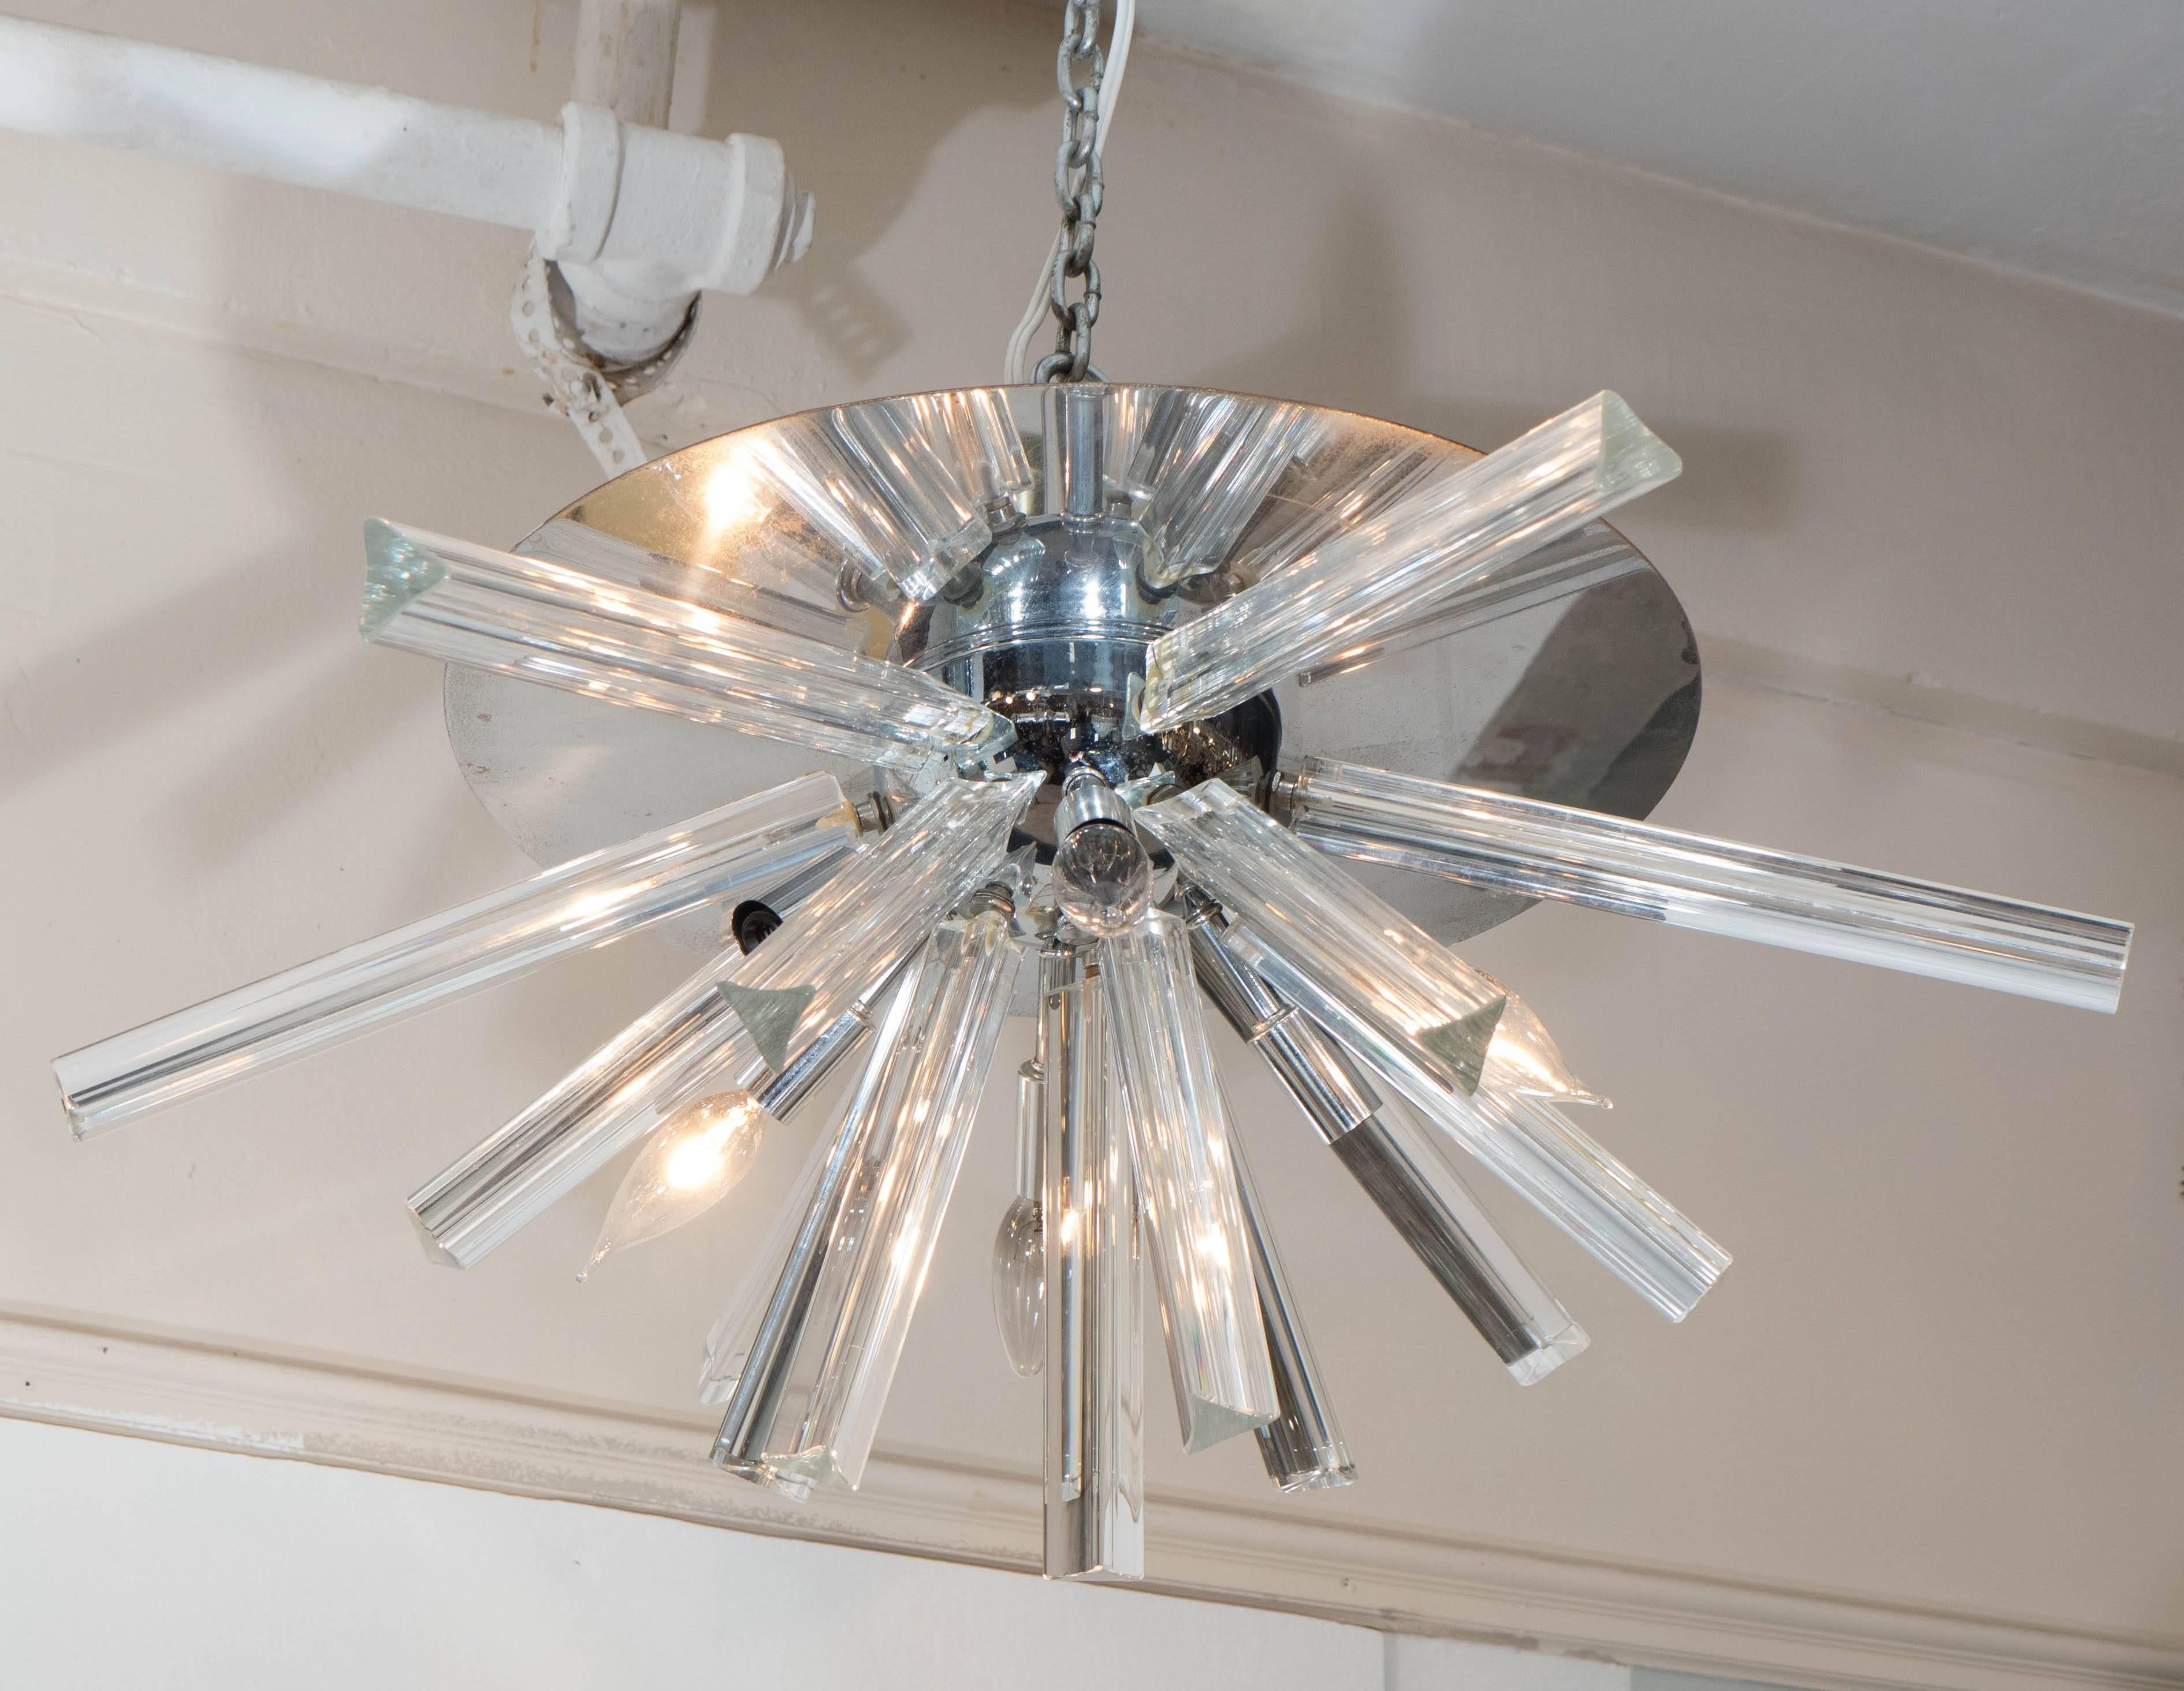 An Italian flush mount Sputnik chandelier, by Venini for Camer, produced circa 1970s, with six sockets and Murano glass triedri prisms extending from a dome form nucleus, affixed to a circular, highly reflective ceiling plate in polished chrome.